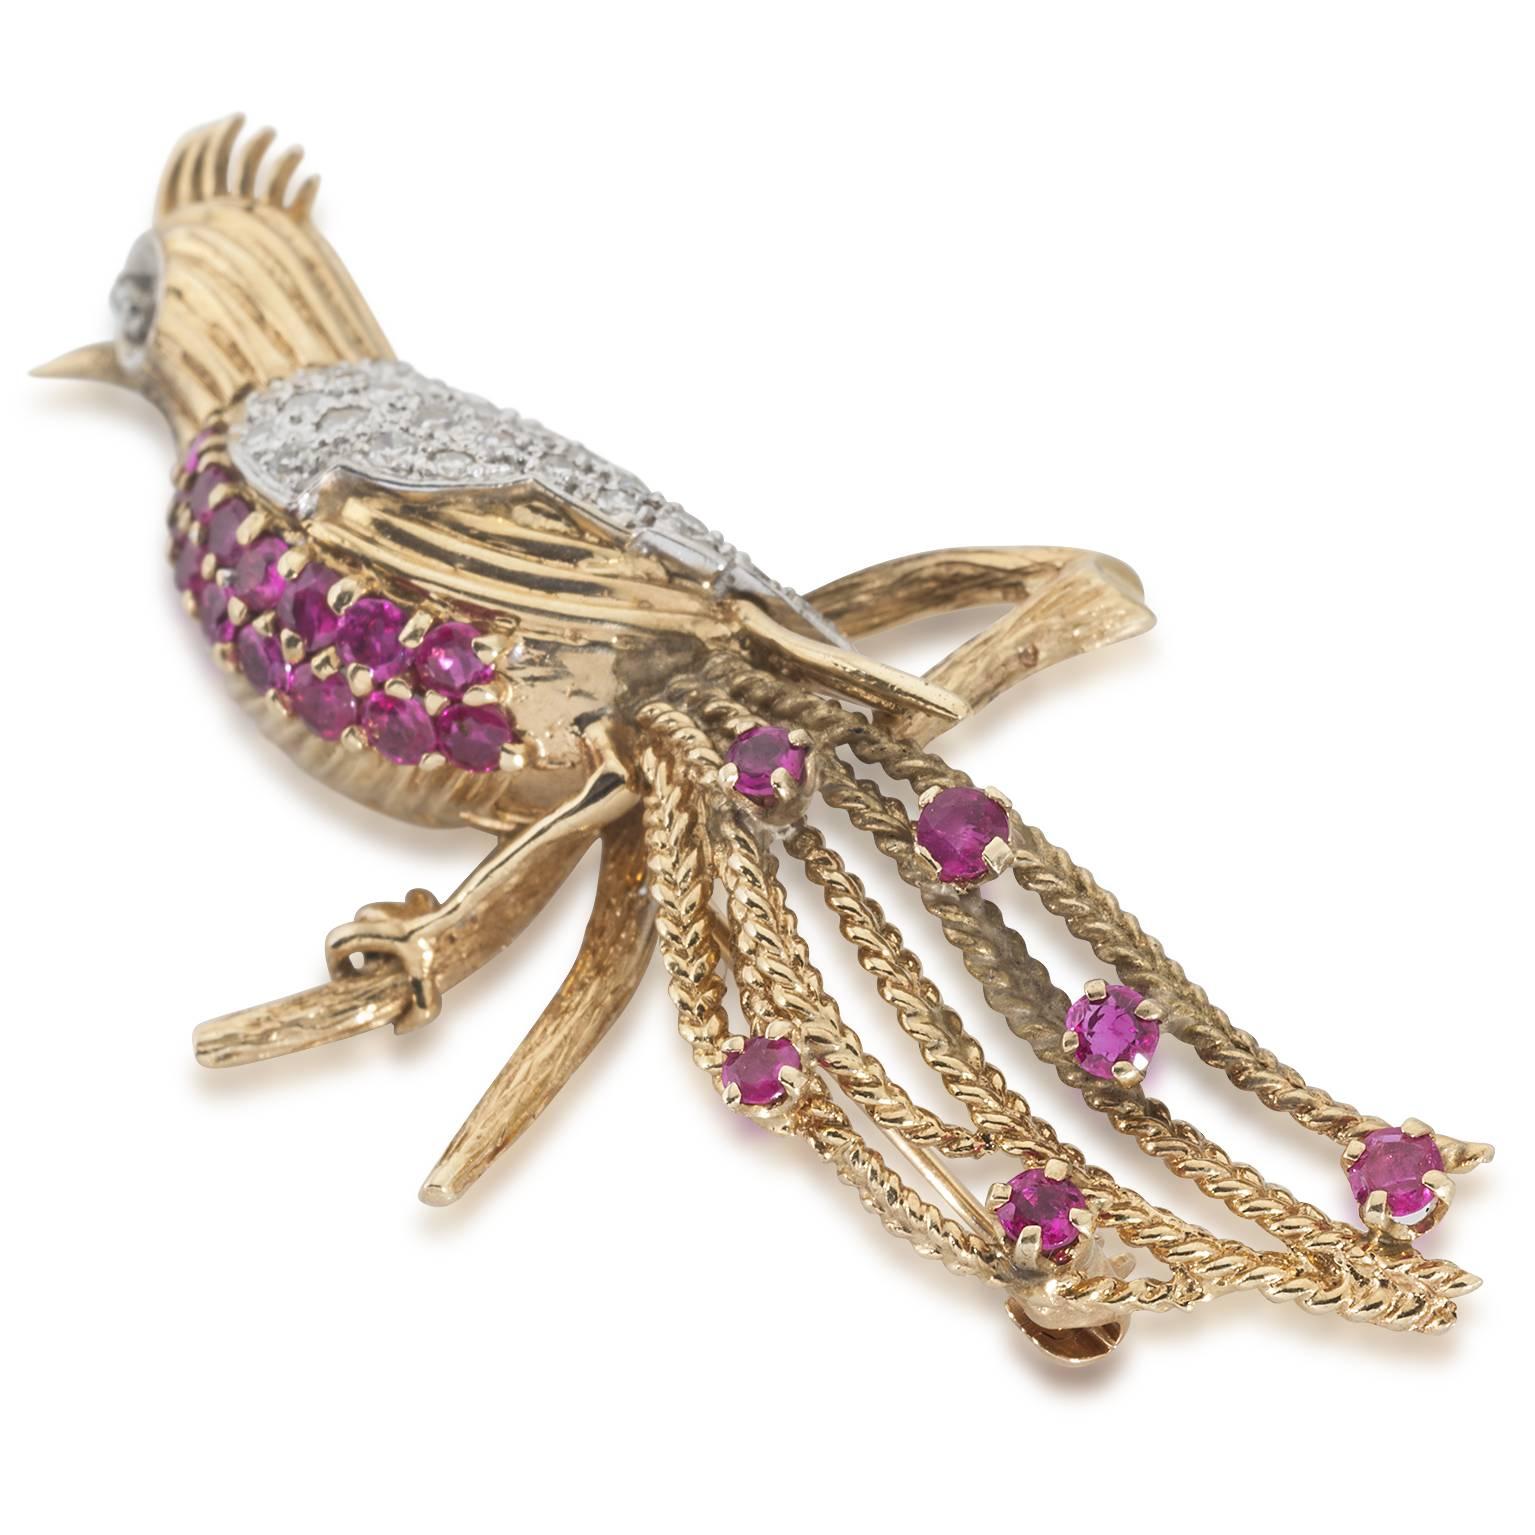 Long, luxurious and vintage, this ruby, diamond, and gold brooch pin has diamond eyes and ruby feathers. Sparkles galore with woven feathers incredible detail work. 
In the trend of all the animal nature from the 1960's inspired by the famous